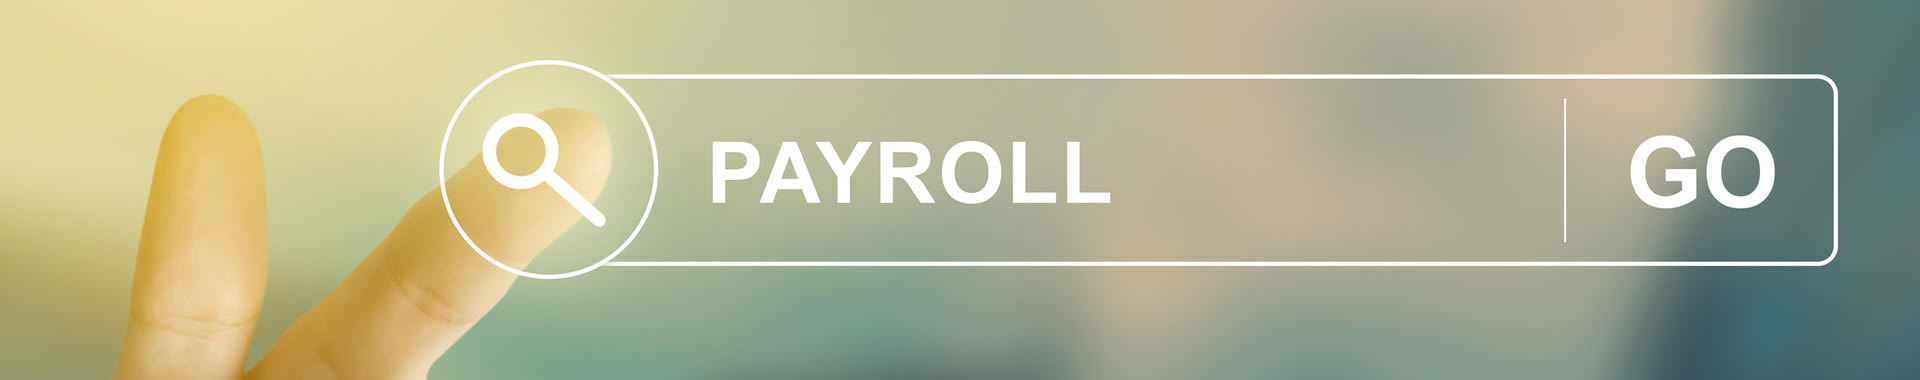 An image depicting the concept of payroll services.